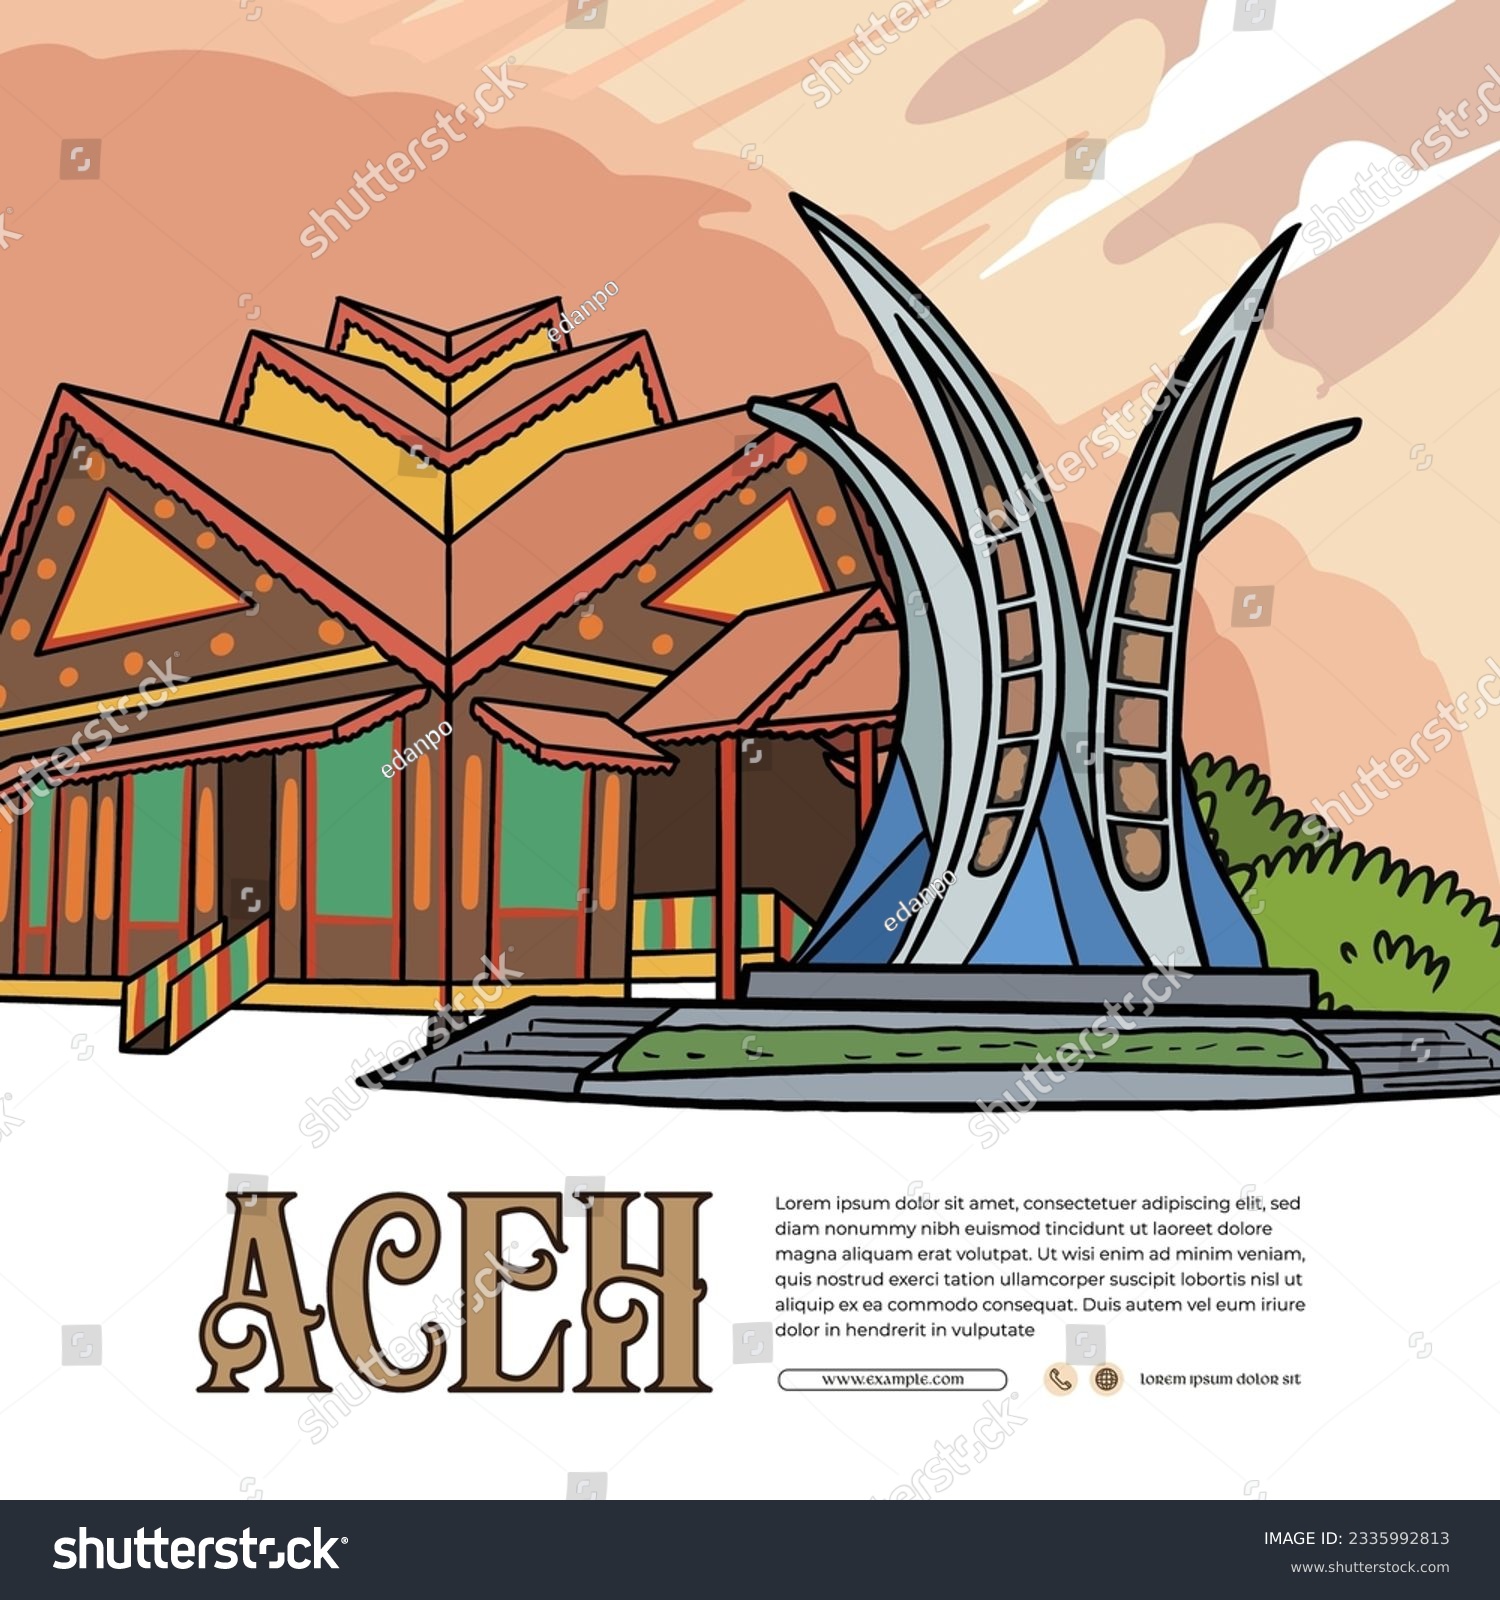 SVG of Social media post layout template for tourism with Aceh culture illustration svg